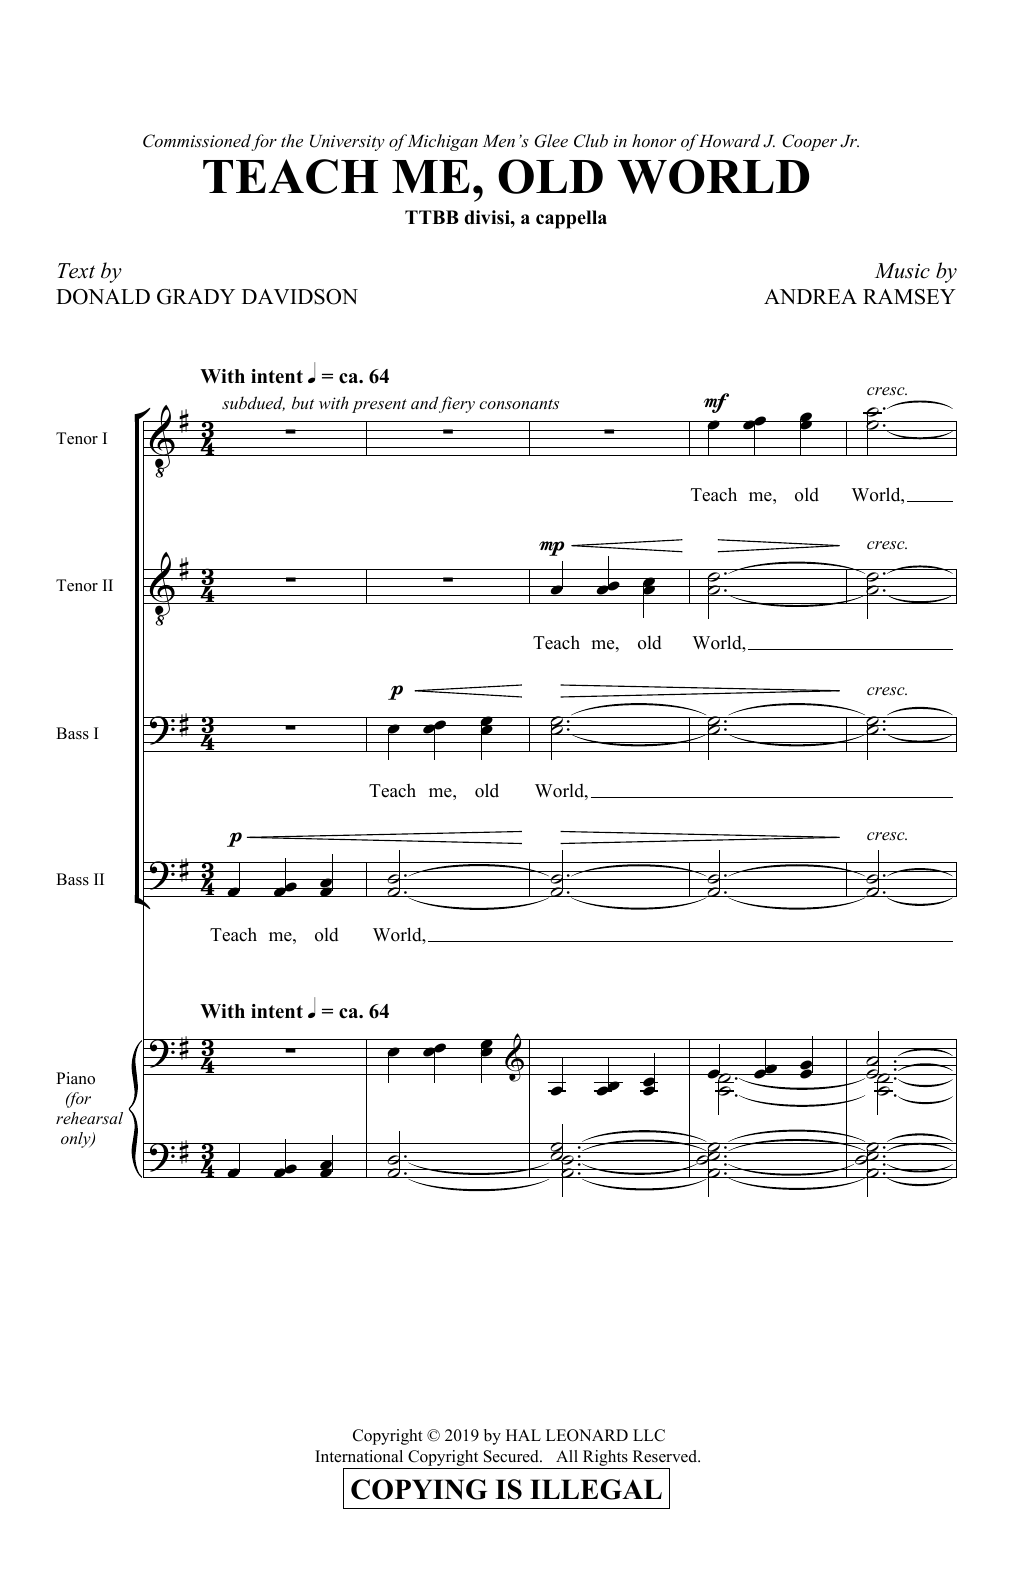 Download Donald Grady Davidson and Andrea Ram Teach Me, Old World Sheet Music